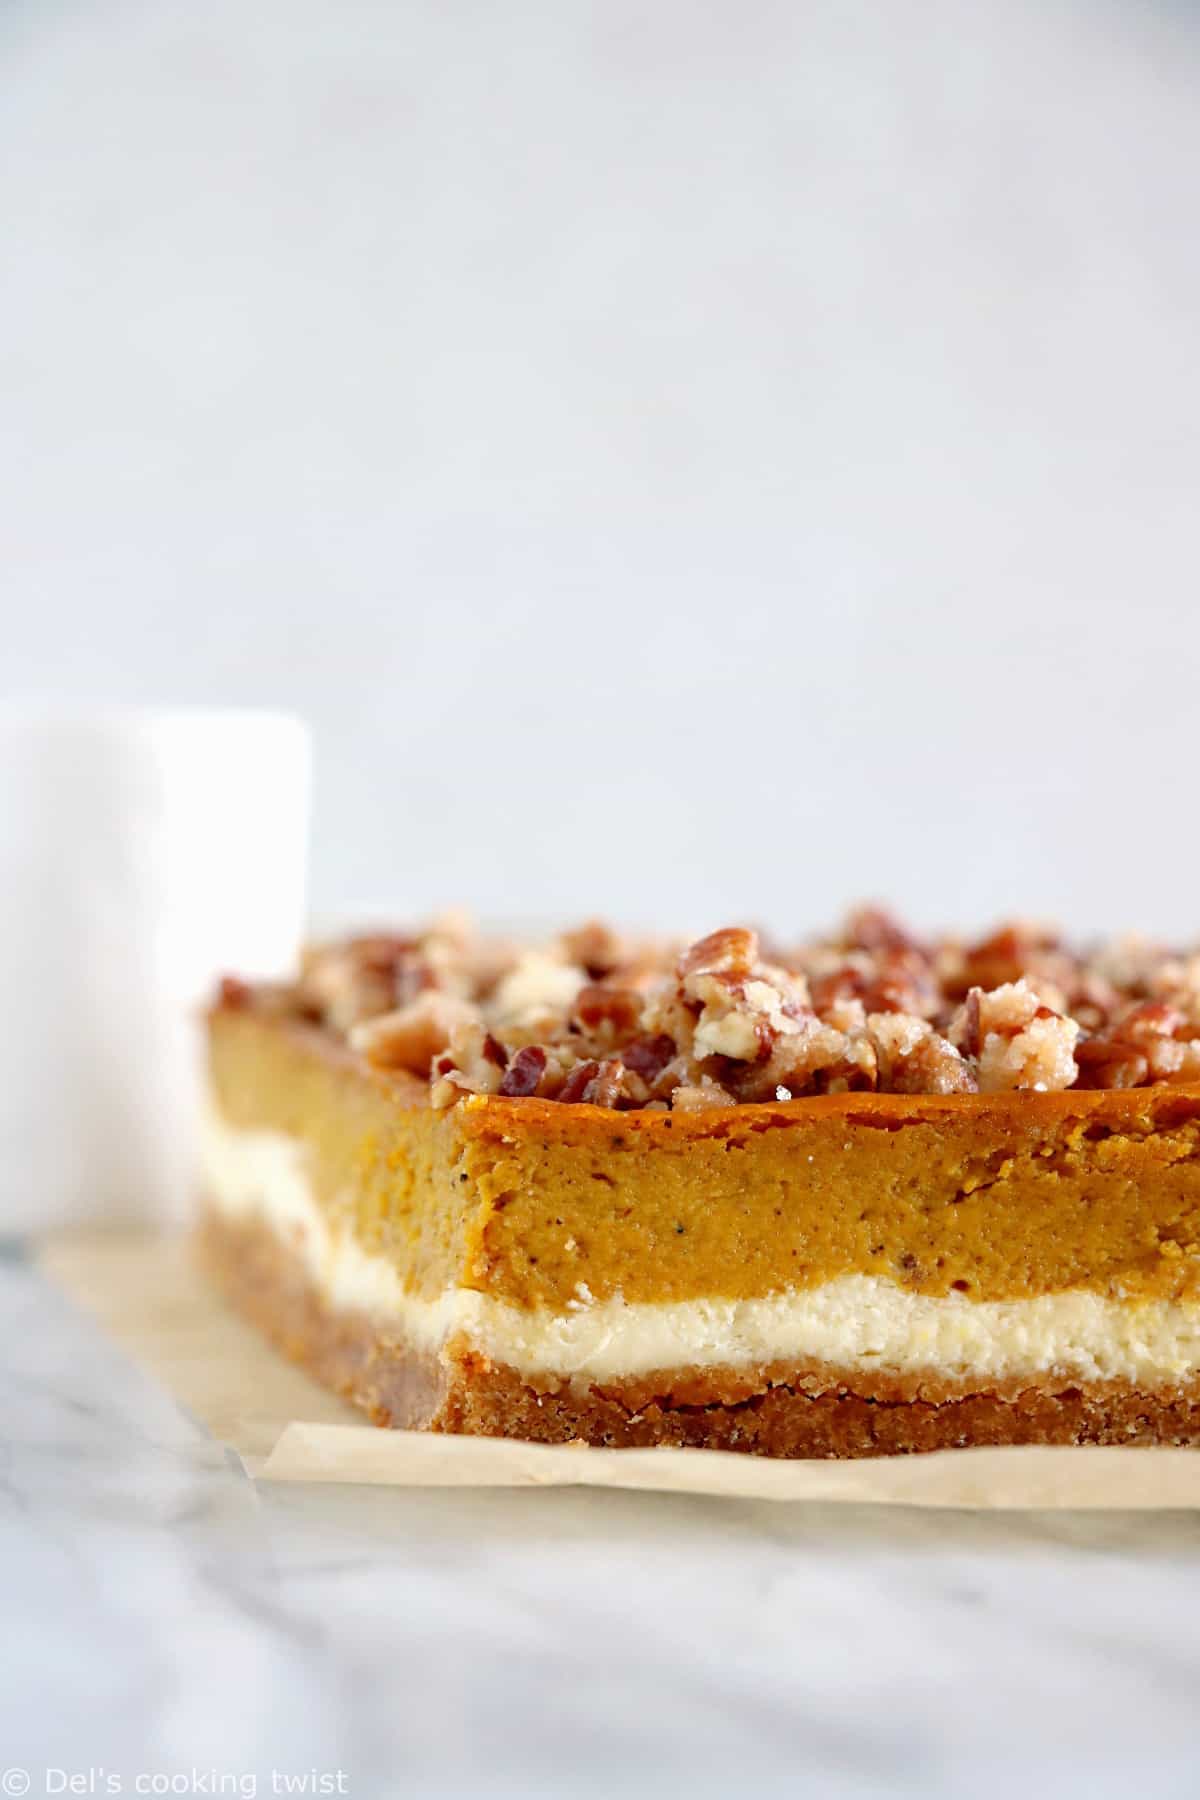 These amazing pumpkin cheesecake bars with candied pecans are delicious and so EASY to make! Full of fall spices, the 4 layers come easily together in a sumptuous dessert that is sure to impress at any holiday gathering.